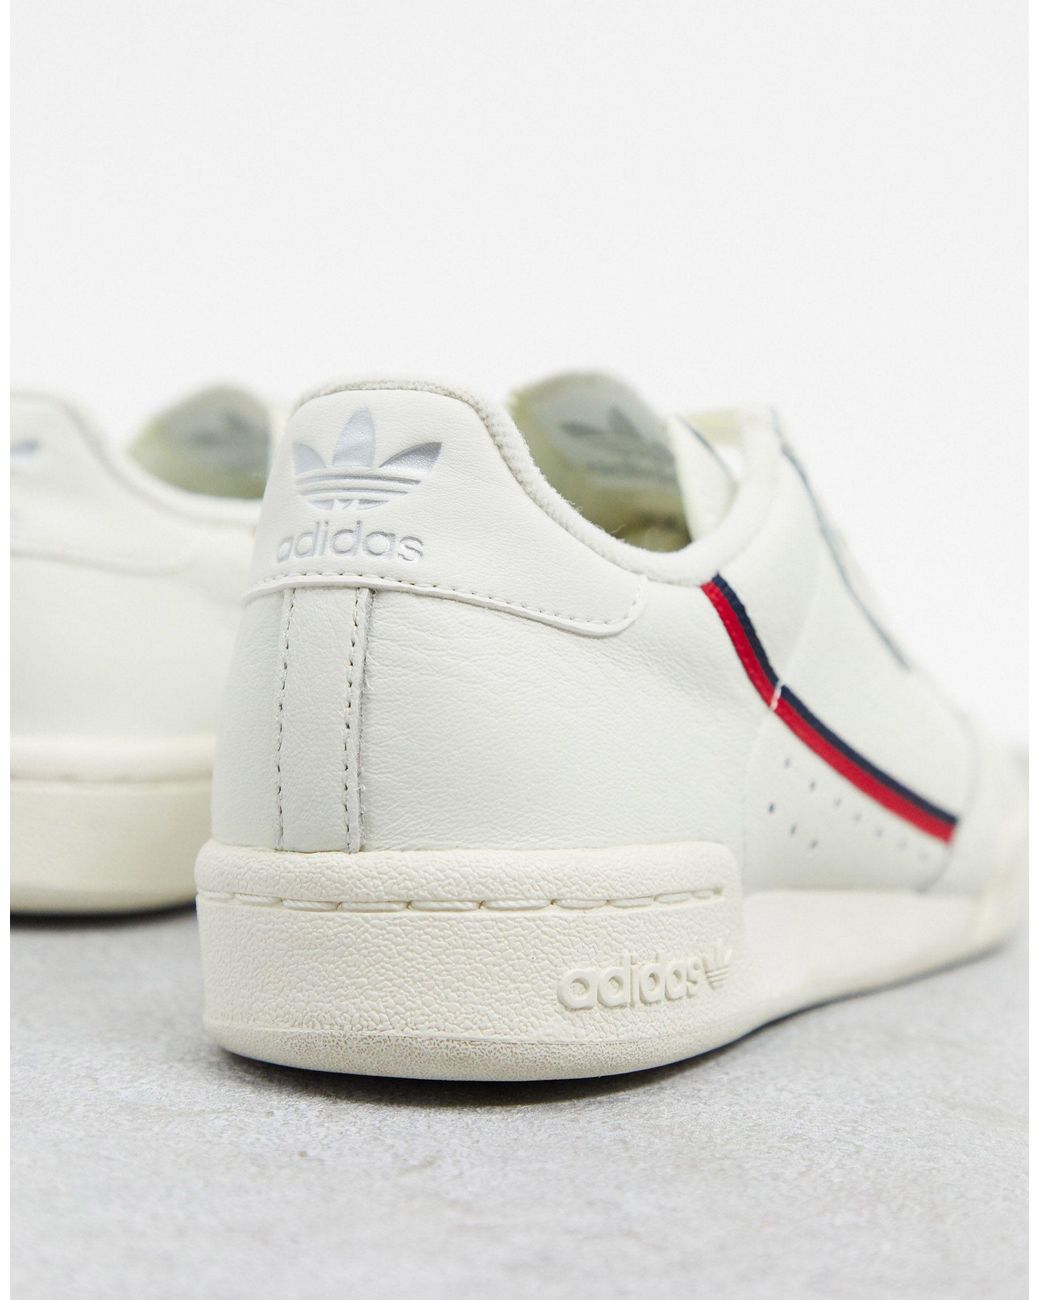 adidas originals continental 8's sneakers in off white and red